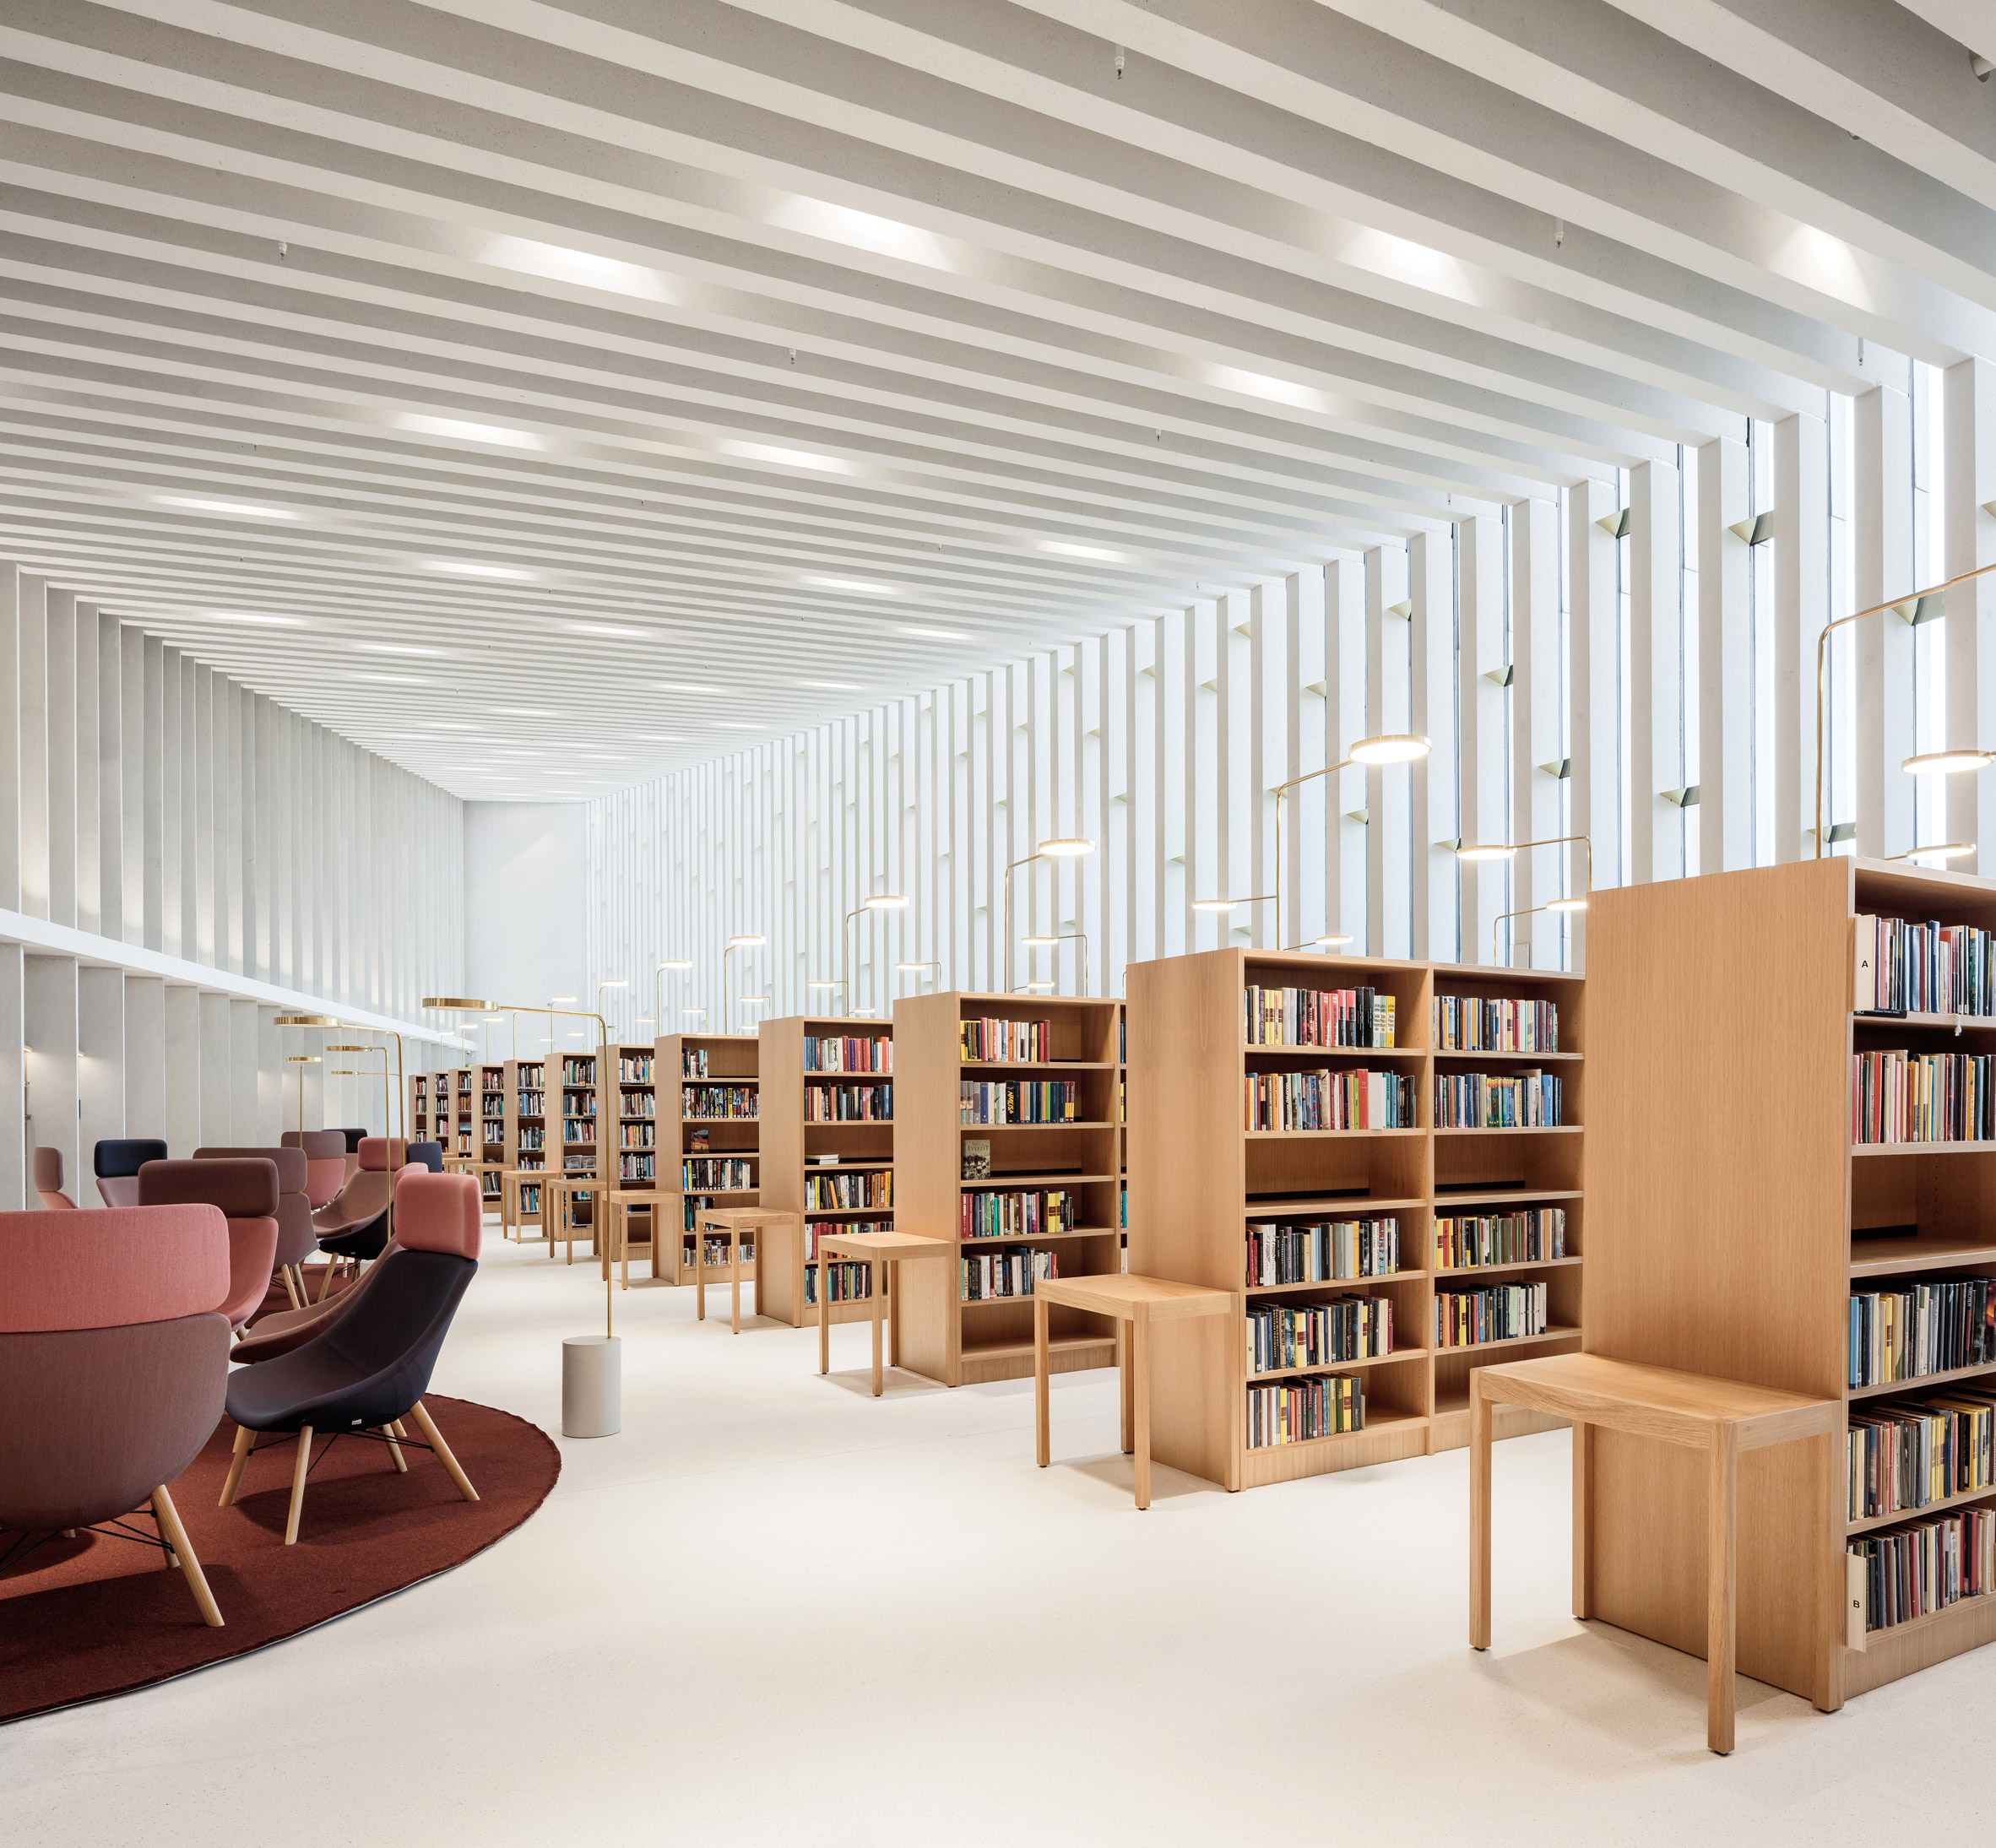 Reading room in Finland